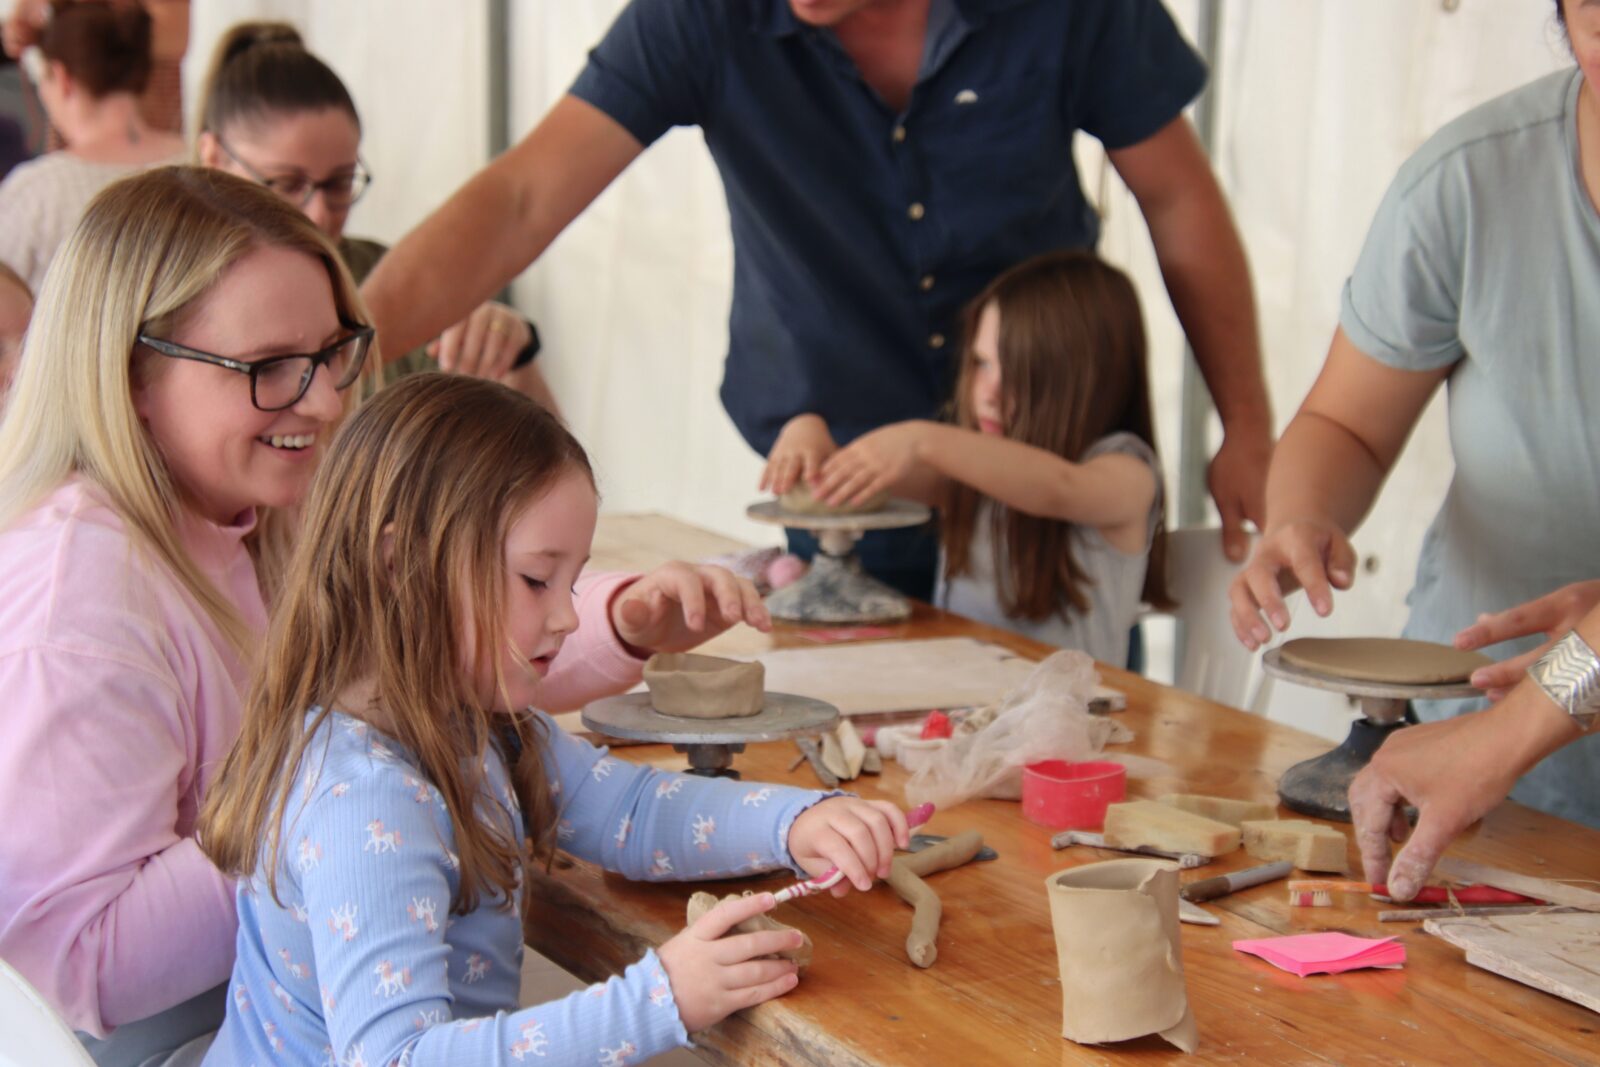 An adult and child works together to make a bowl or cup out of clay